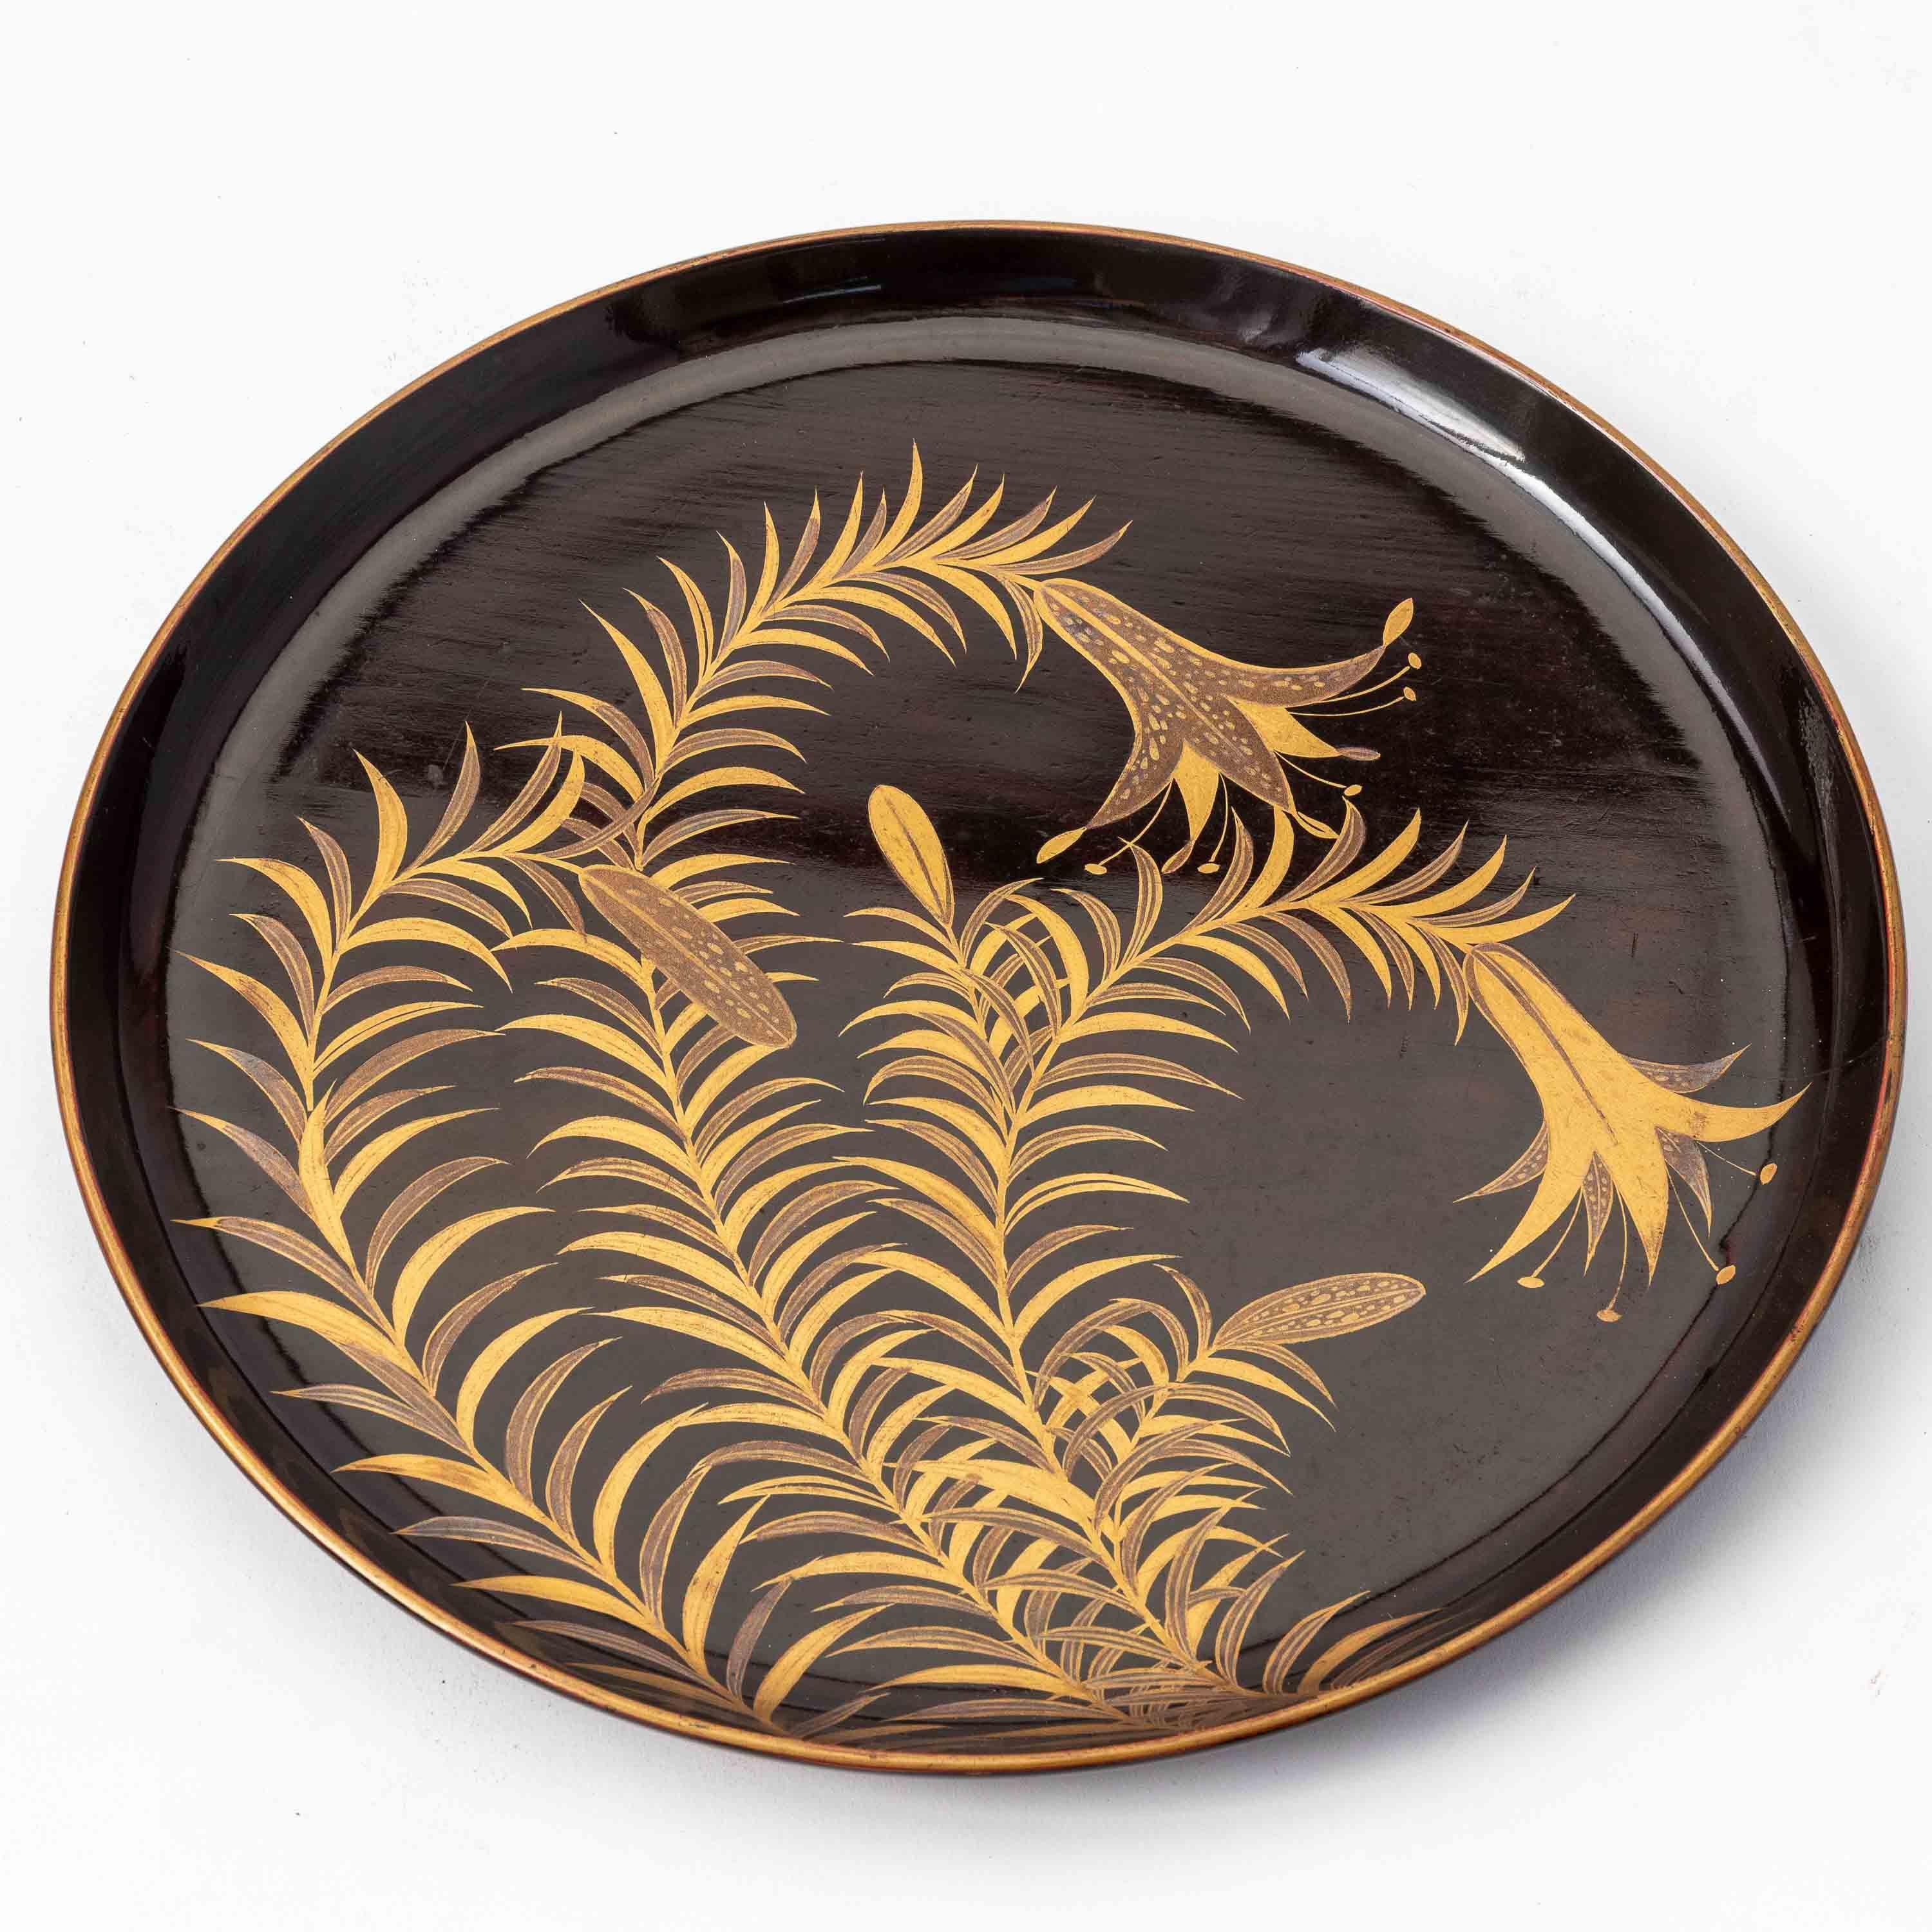 Lacquered Set of 9 Antique Japanese Circular Lacquer Trays with Botanical Designs in Gold